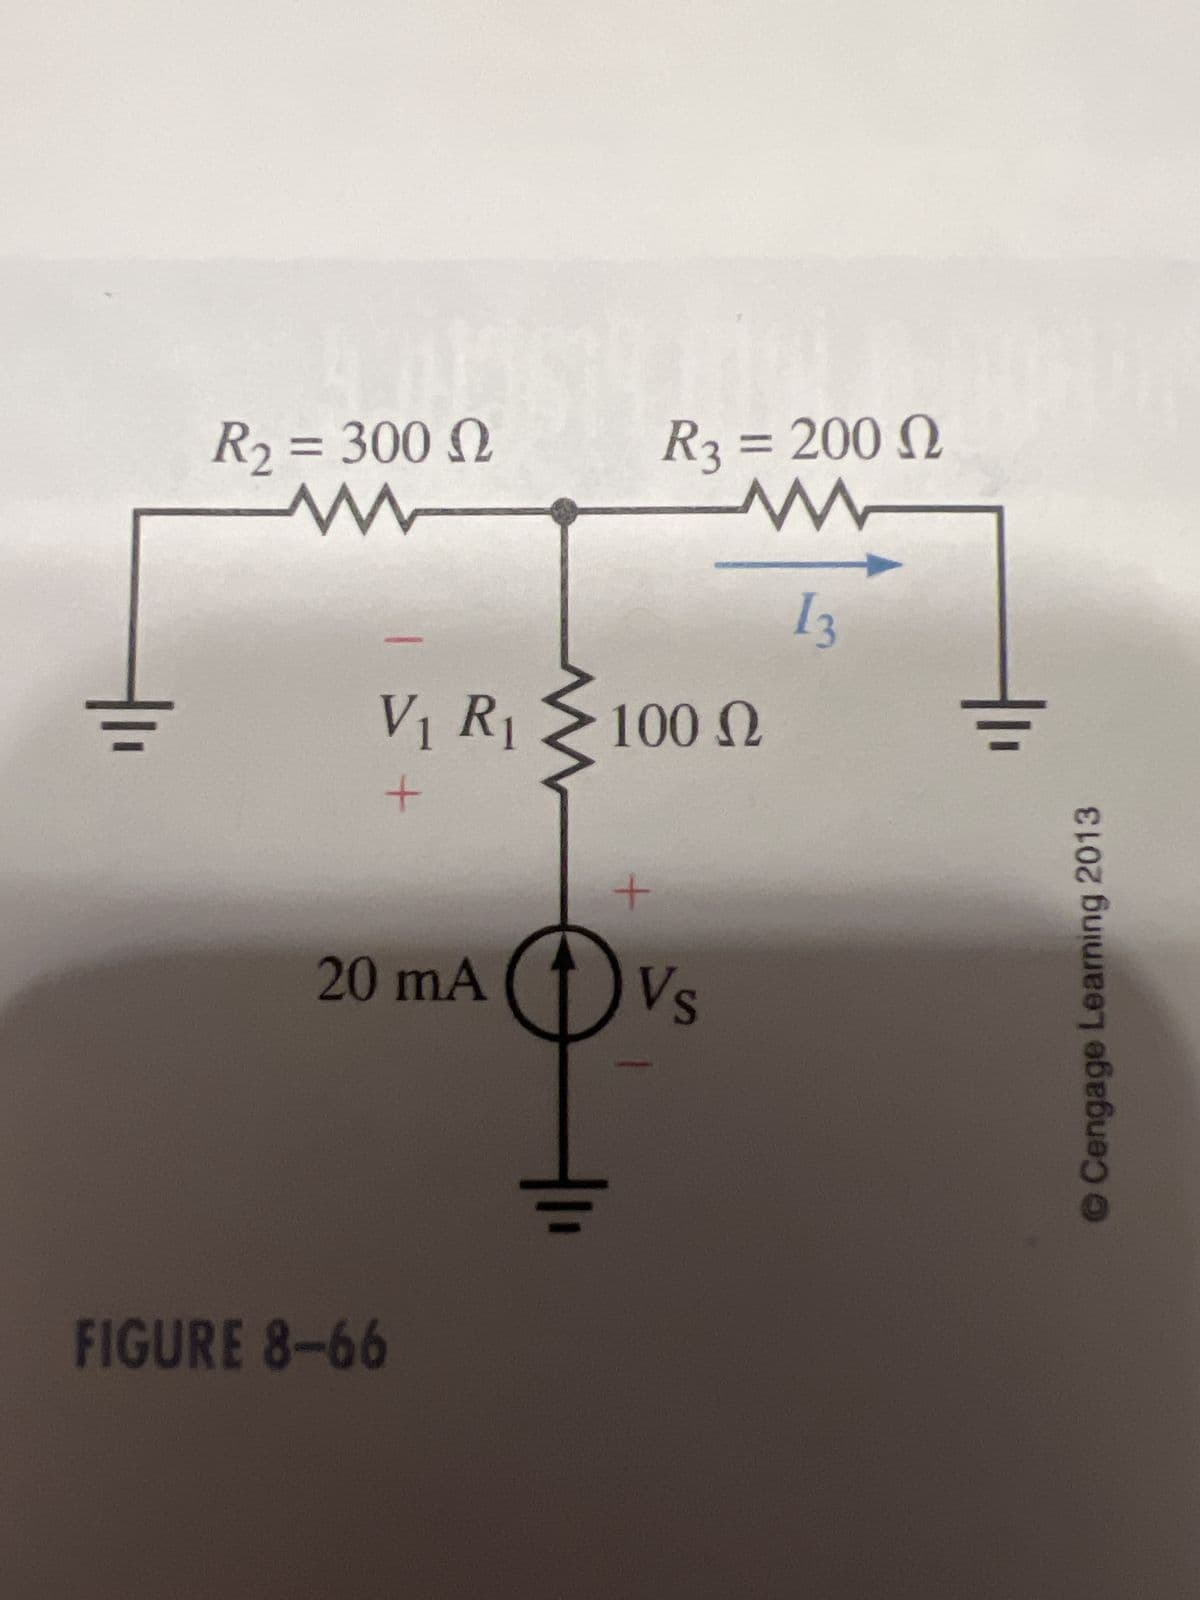 FIGURE 8-66
R₂ = 300 2
w
R3 = 200
13
V₁ R₁
100 Ω
+
+
20 mA
Vs
© Cengage Learning 2013